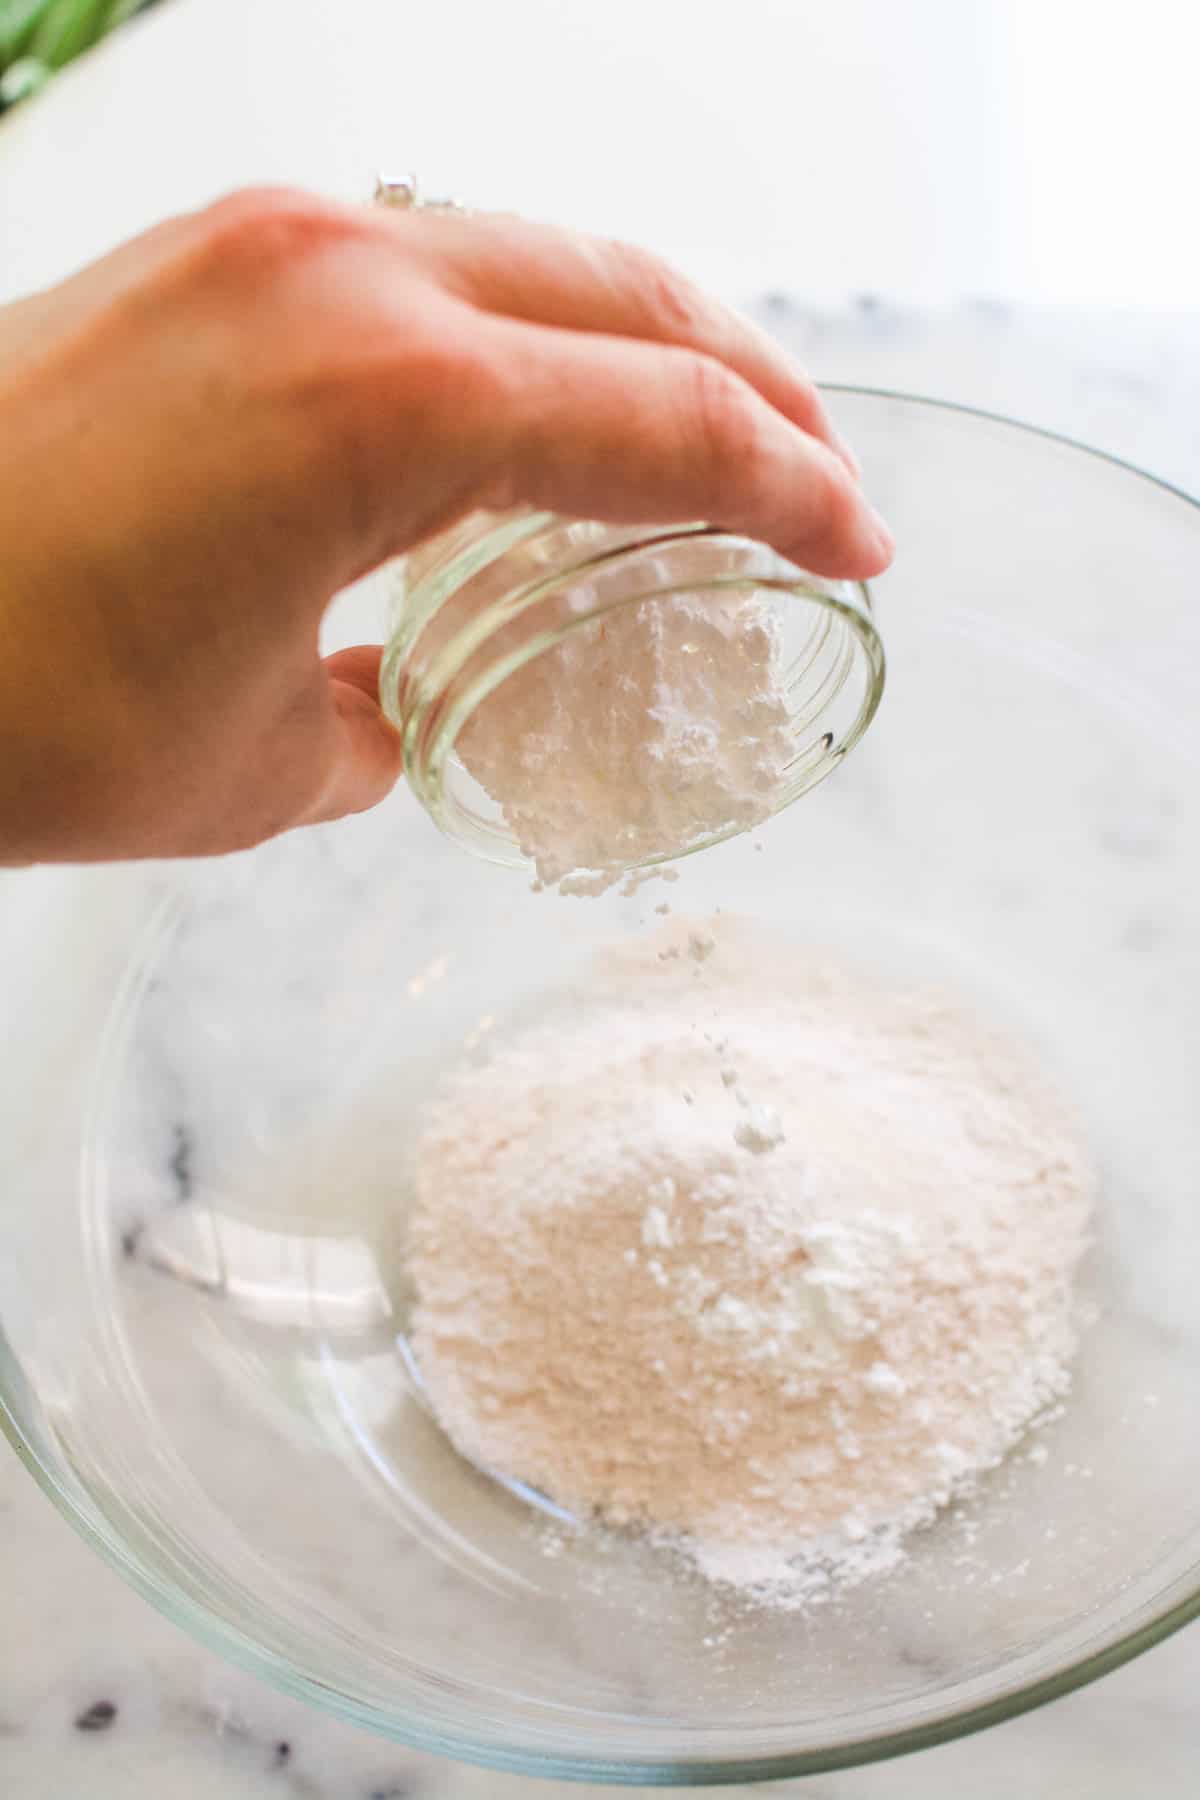 Pouring powdered sugar into a bowl of dry vanilla pudding powder in a glass bowl.